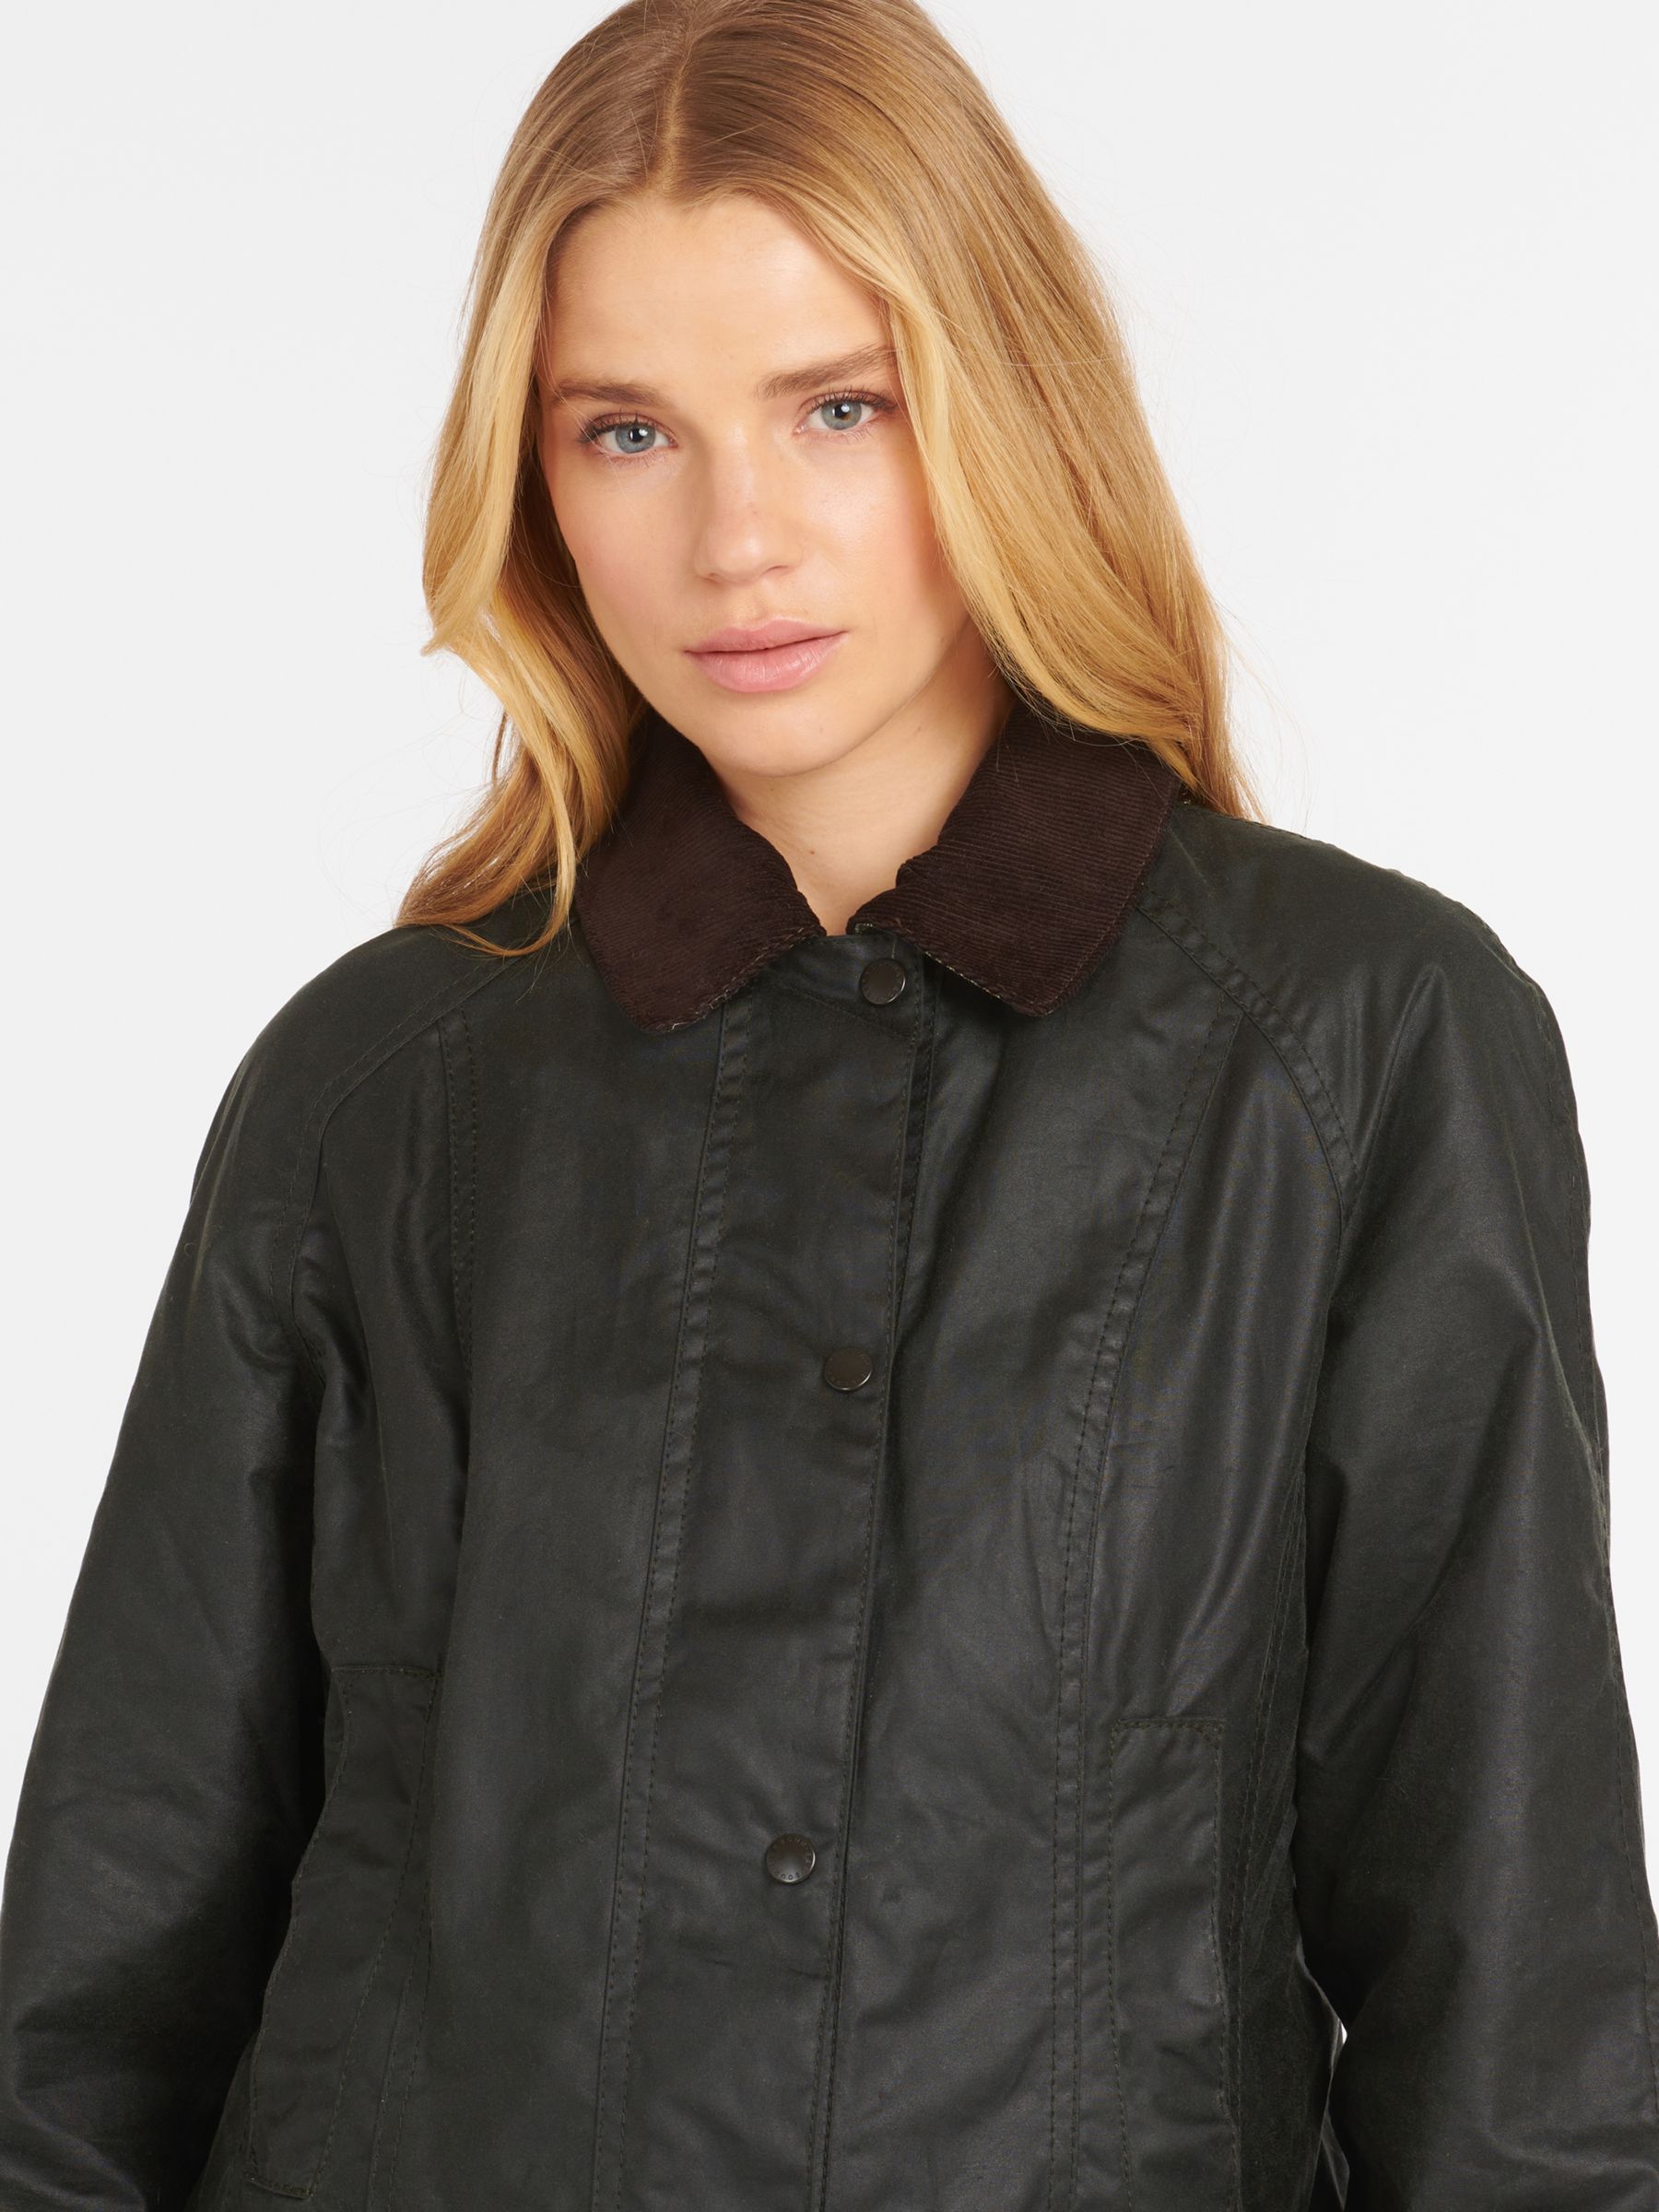 Buy Barbour Classic Beadnell Waxed Jacket Online at johnlewis.com